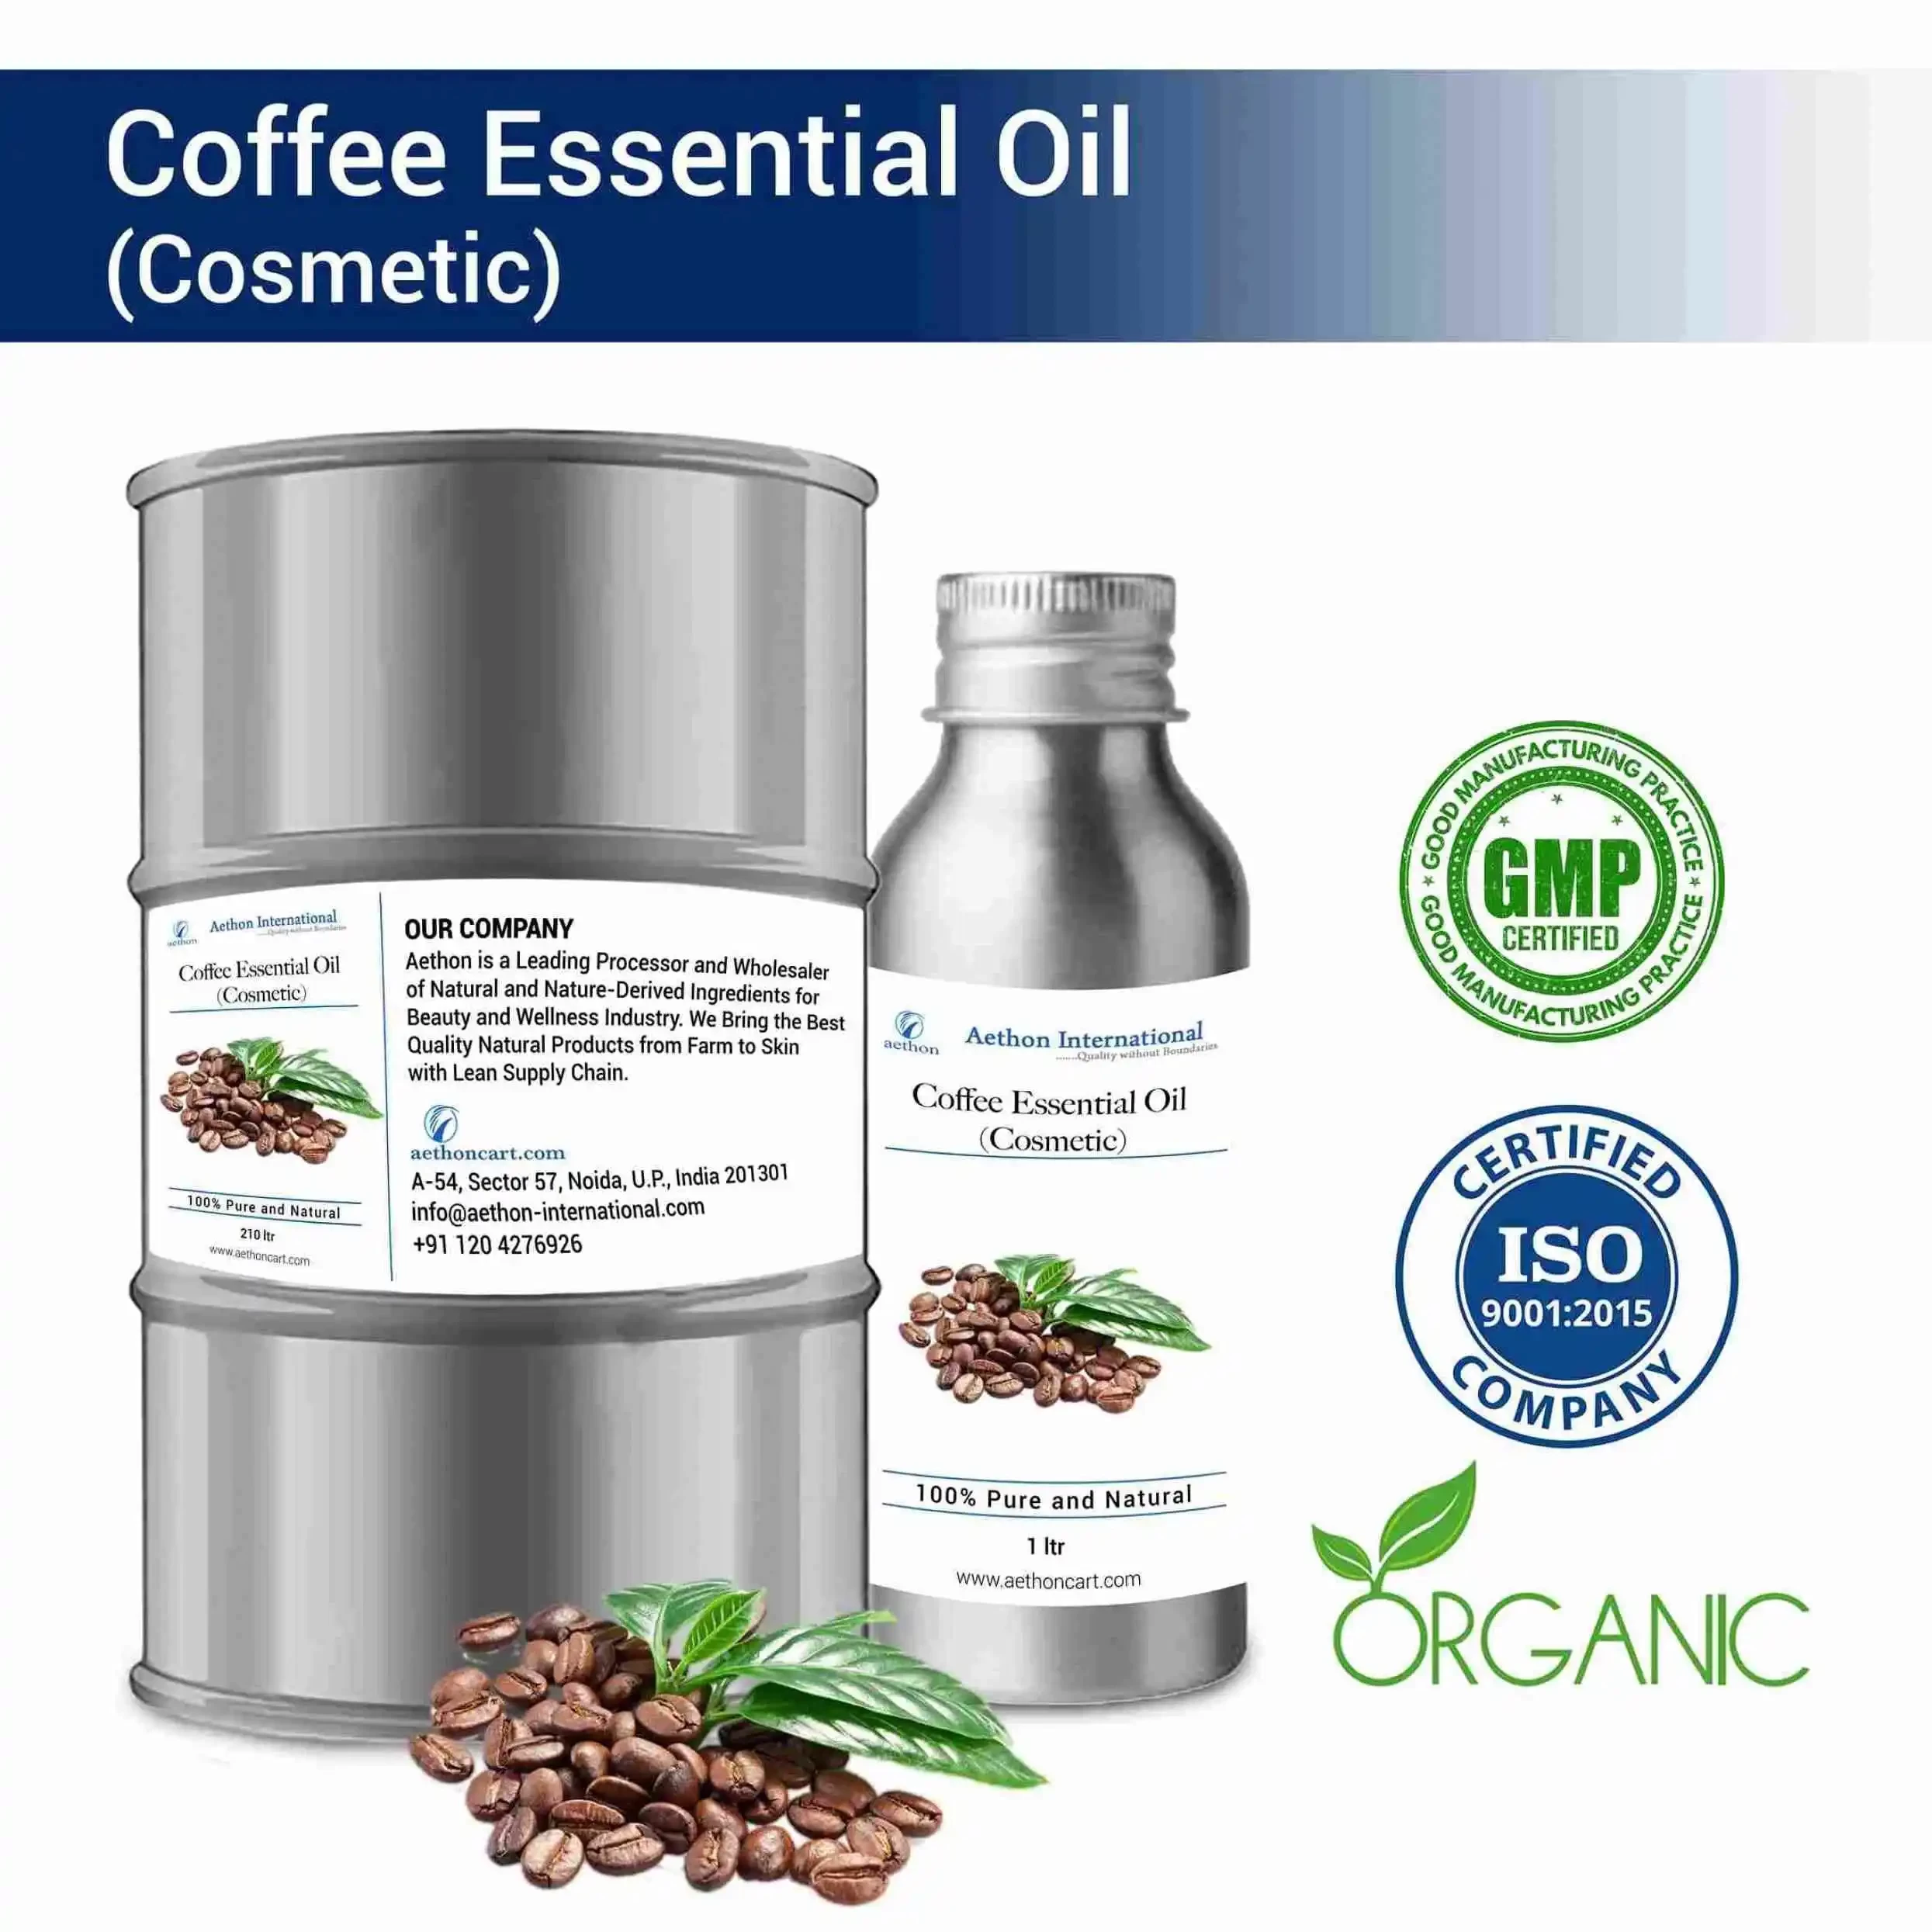 Coffee Essential Oil (Cosmetic)